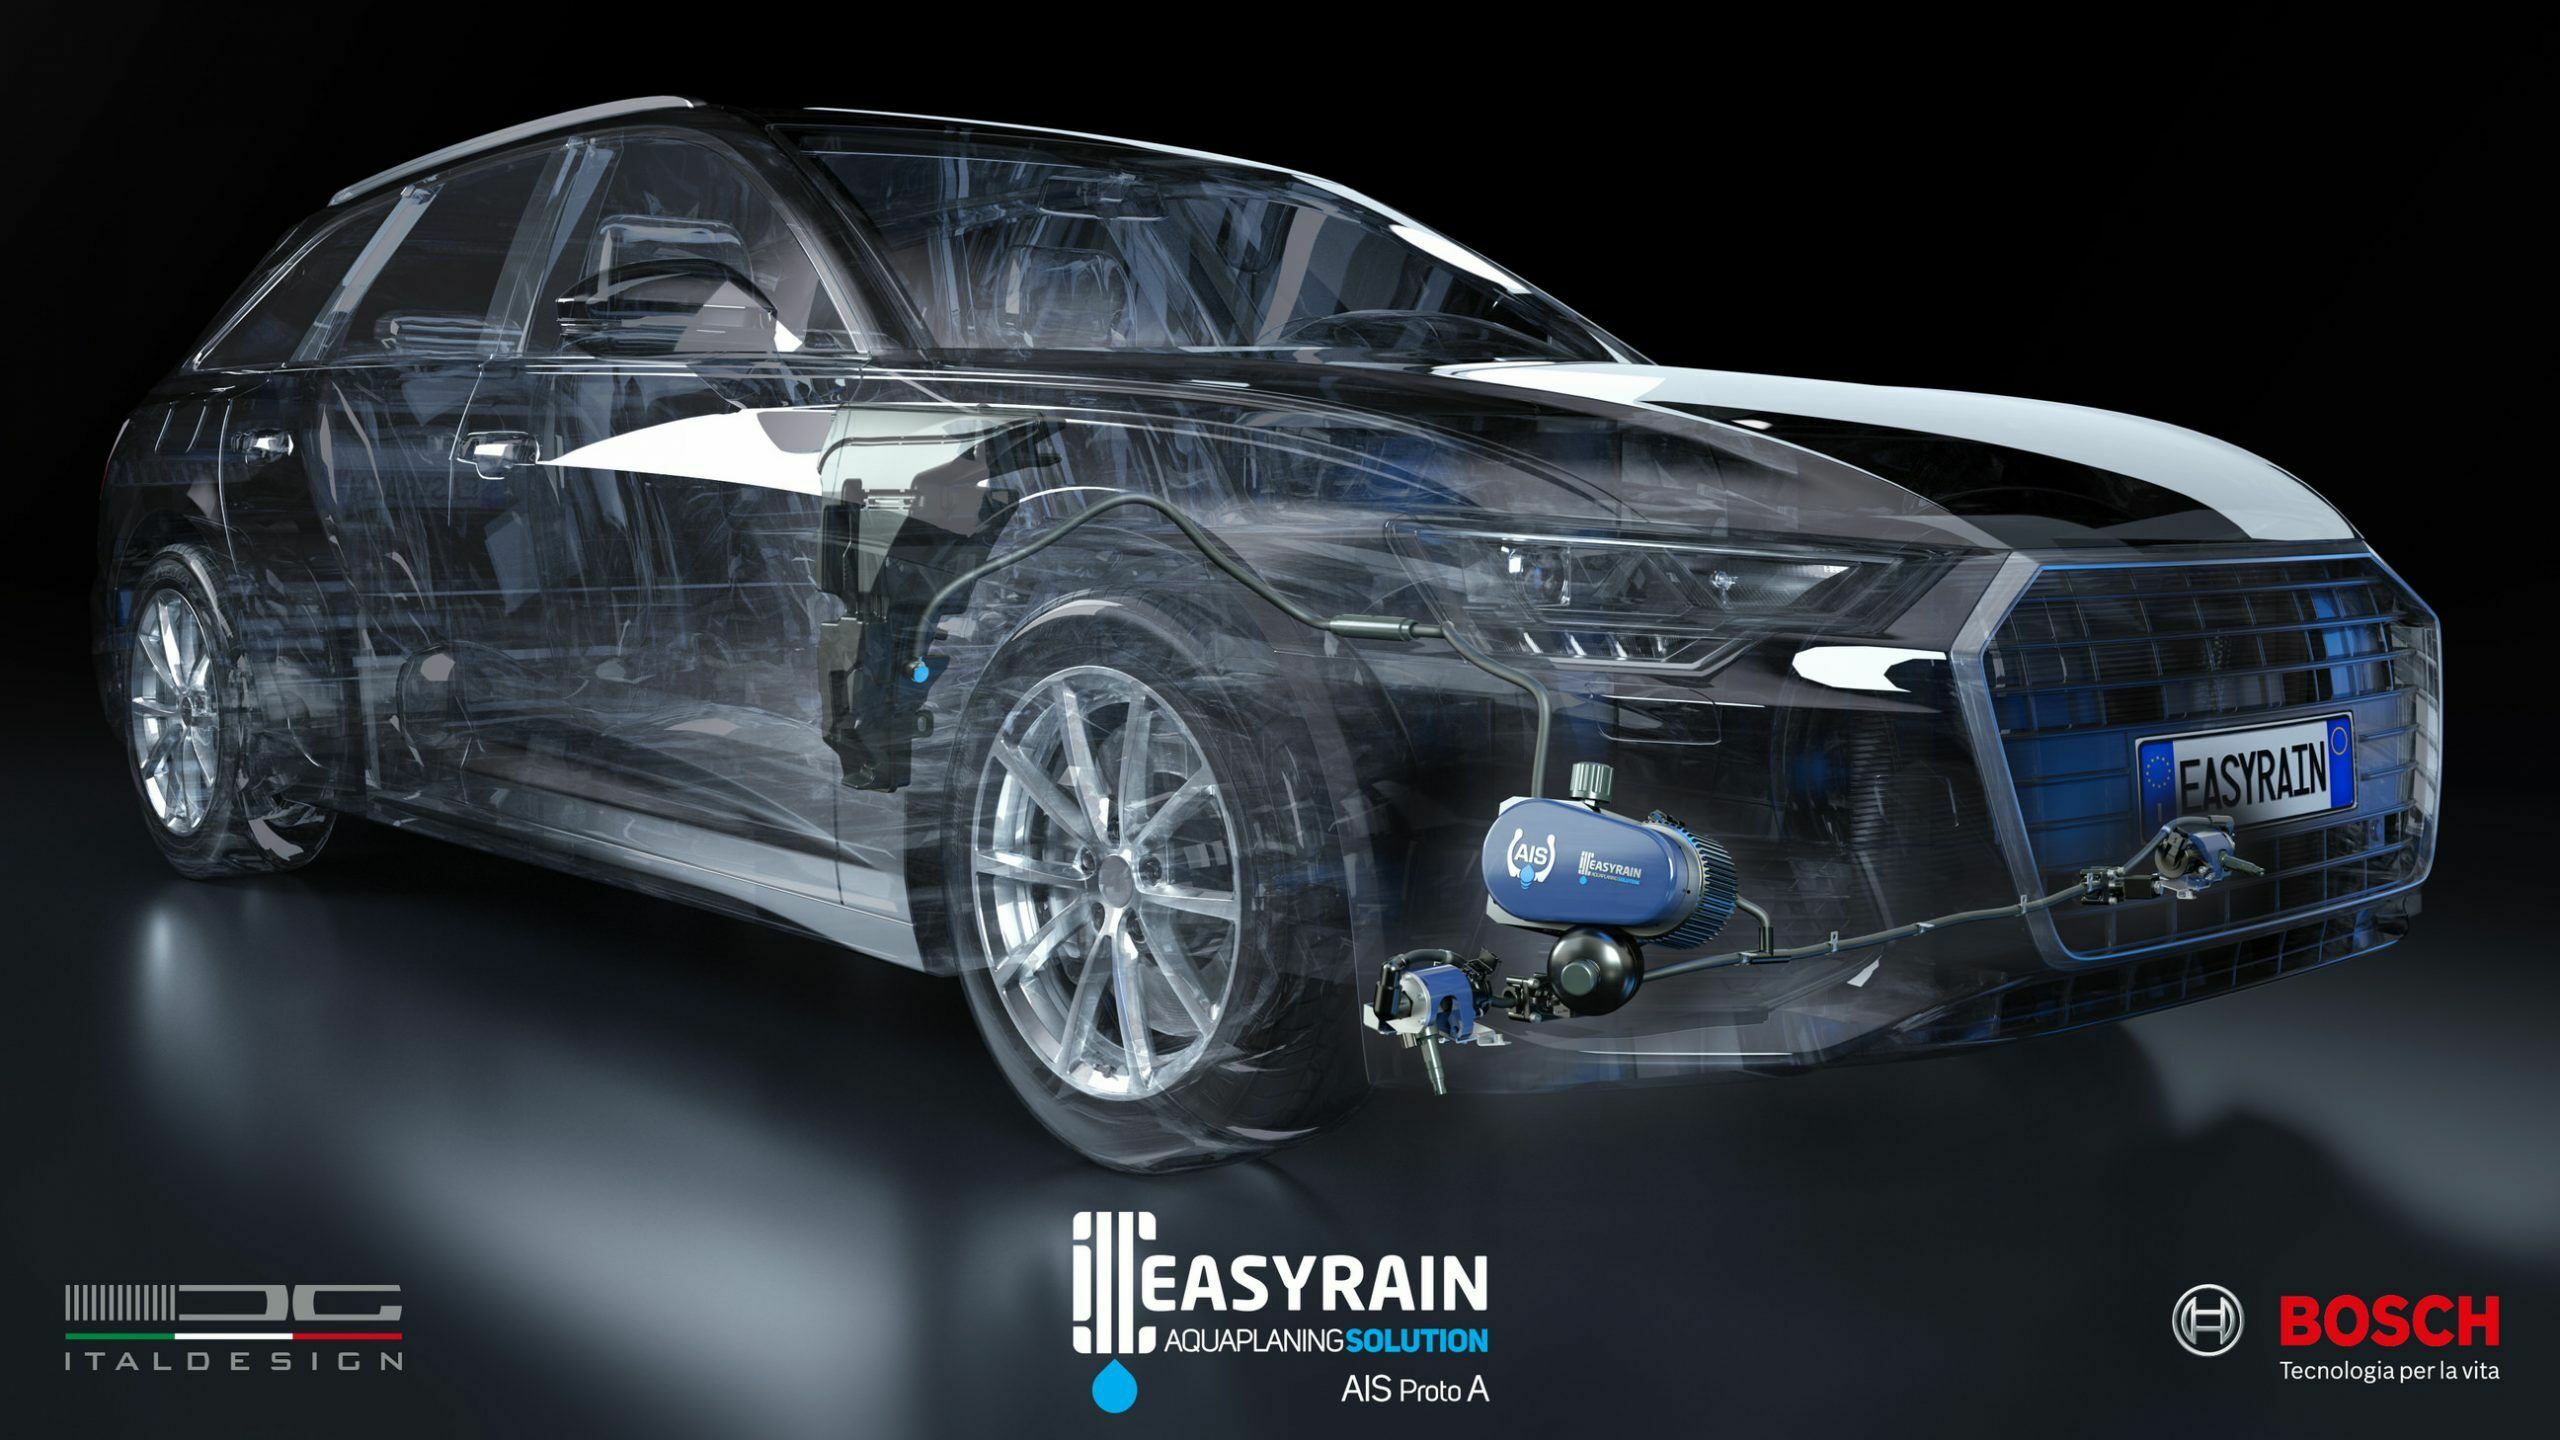 AIS: Easyrain, Bosch and Italdesign to test the anti-aquaplanning system on a series production car